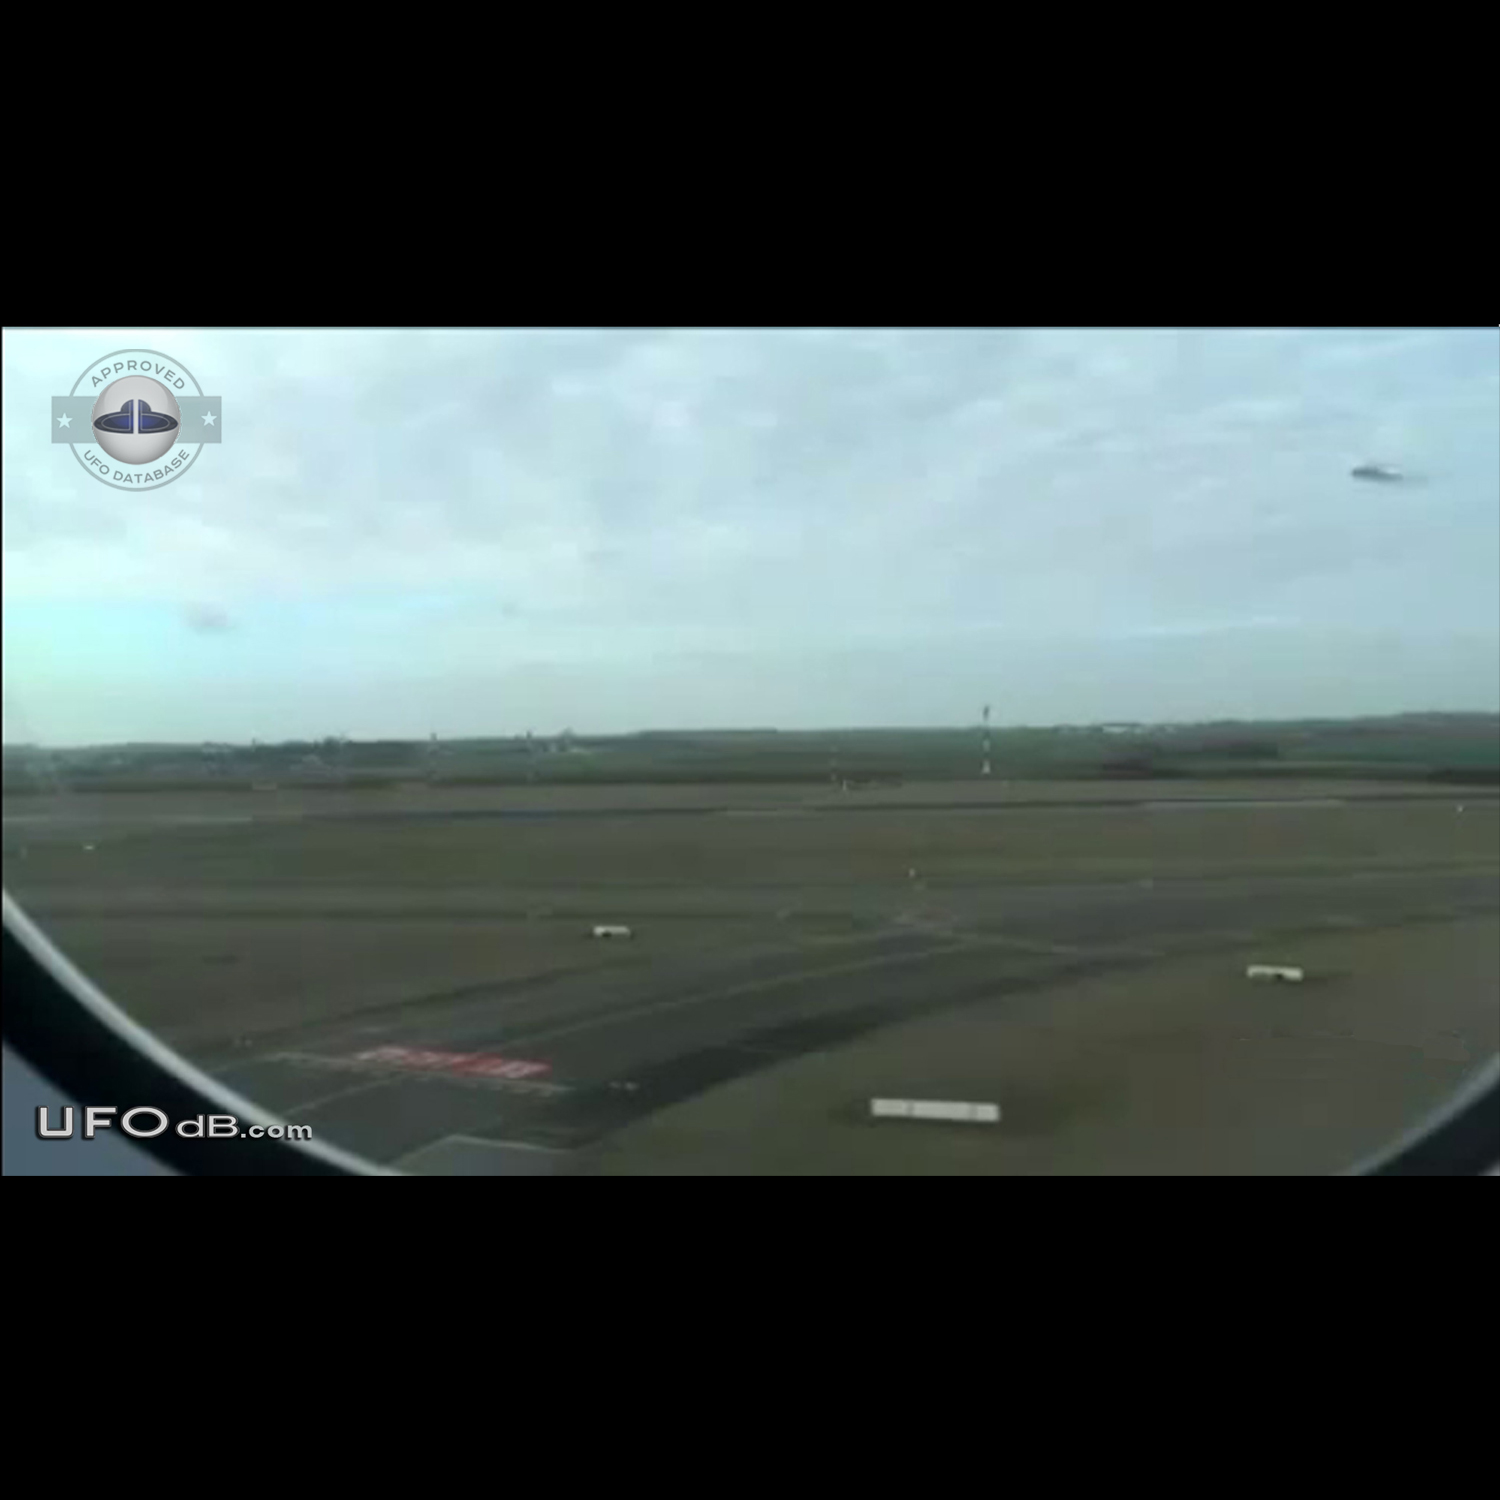 UFO picture from plane taking off Paris Charles de Gaulle airport 2013 UFO Picture #541-1